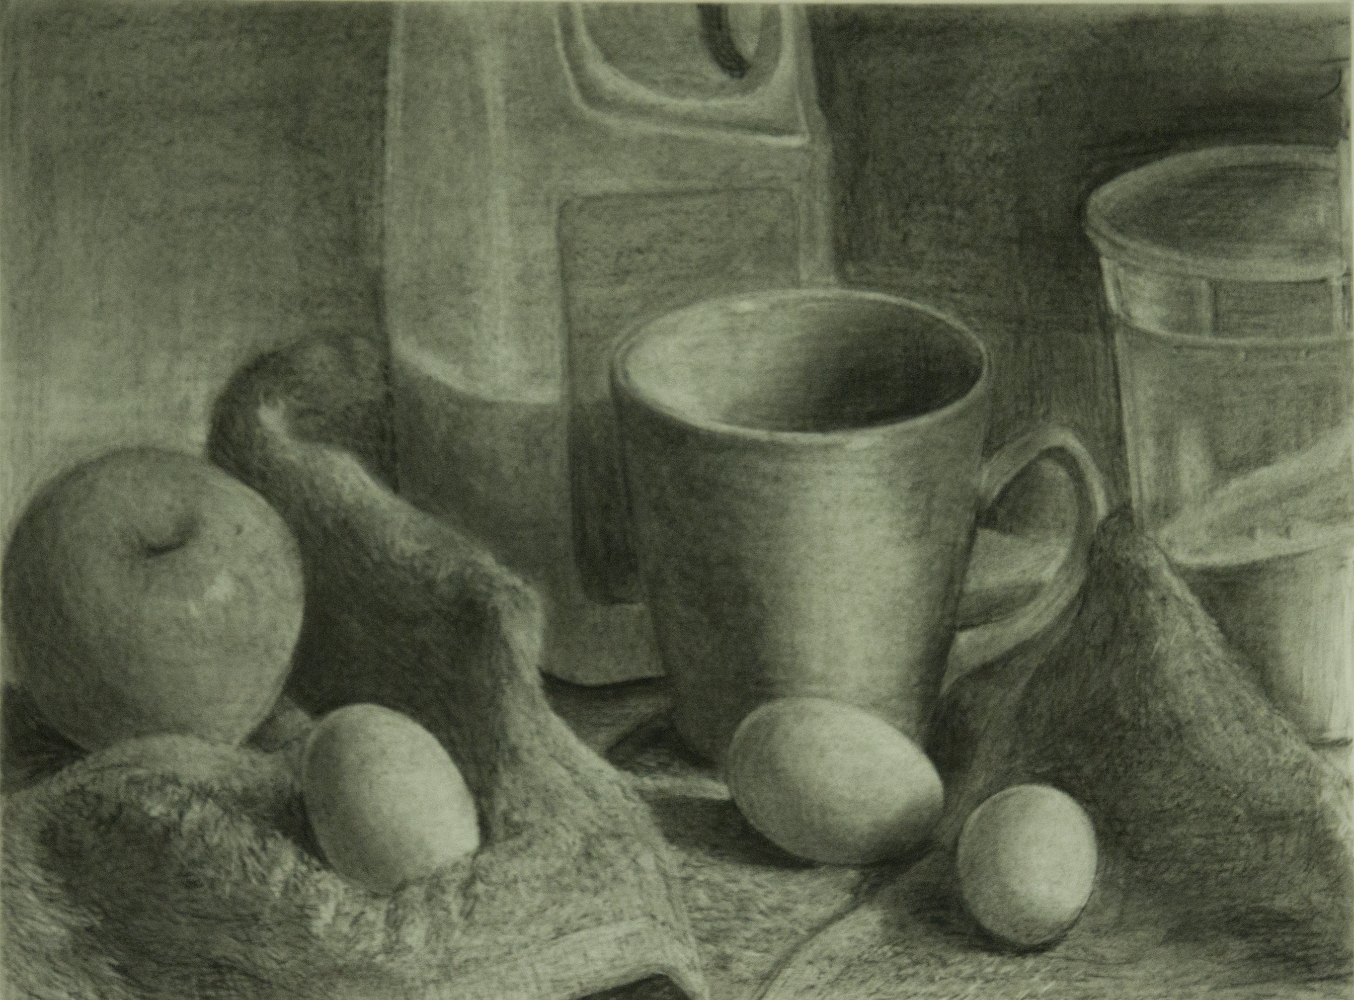 thumbnail of Untitled by Tract Leung. medium: charcoal. date: 2011. dimensions: 18 x 24 inches